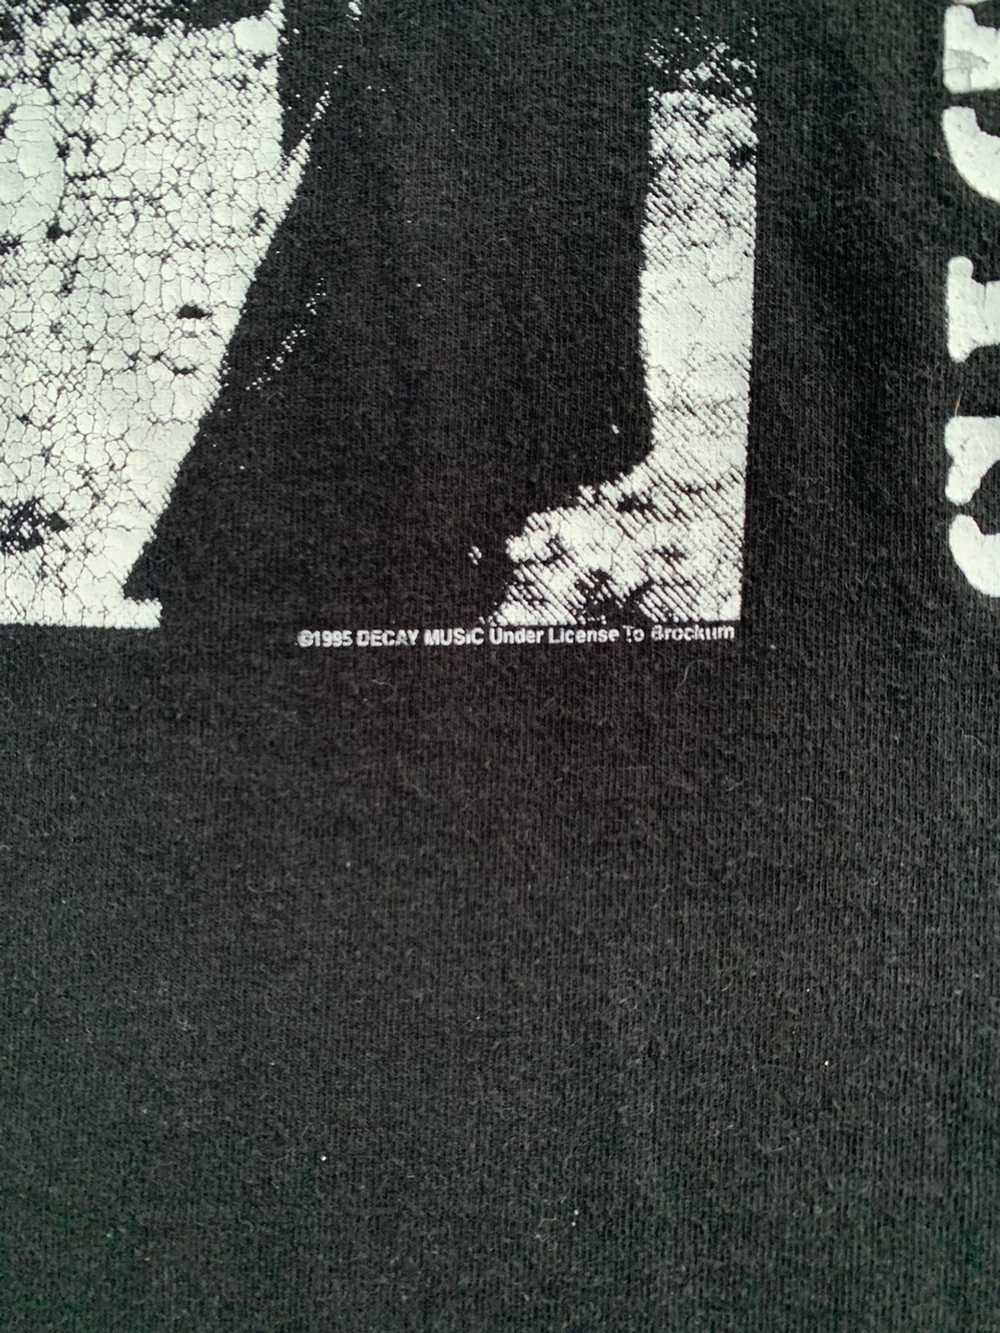 Band Tees × Brockum 1995 Dead Kennedys Holiday in… - image 4